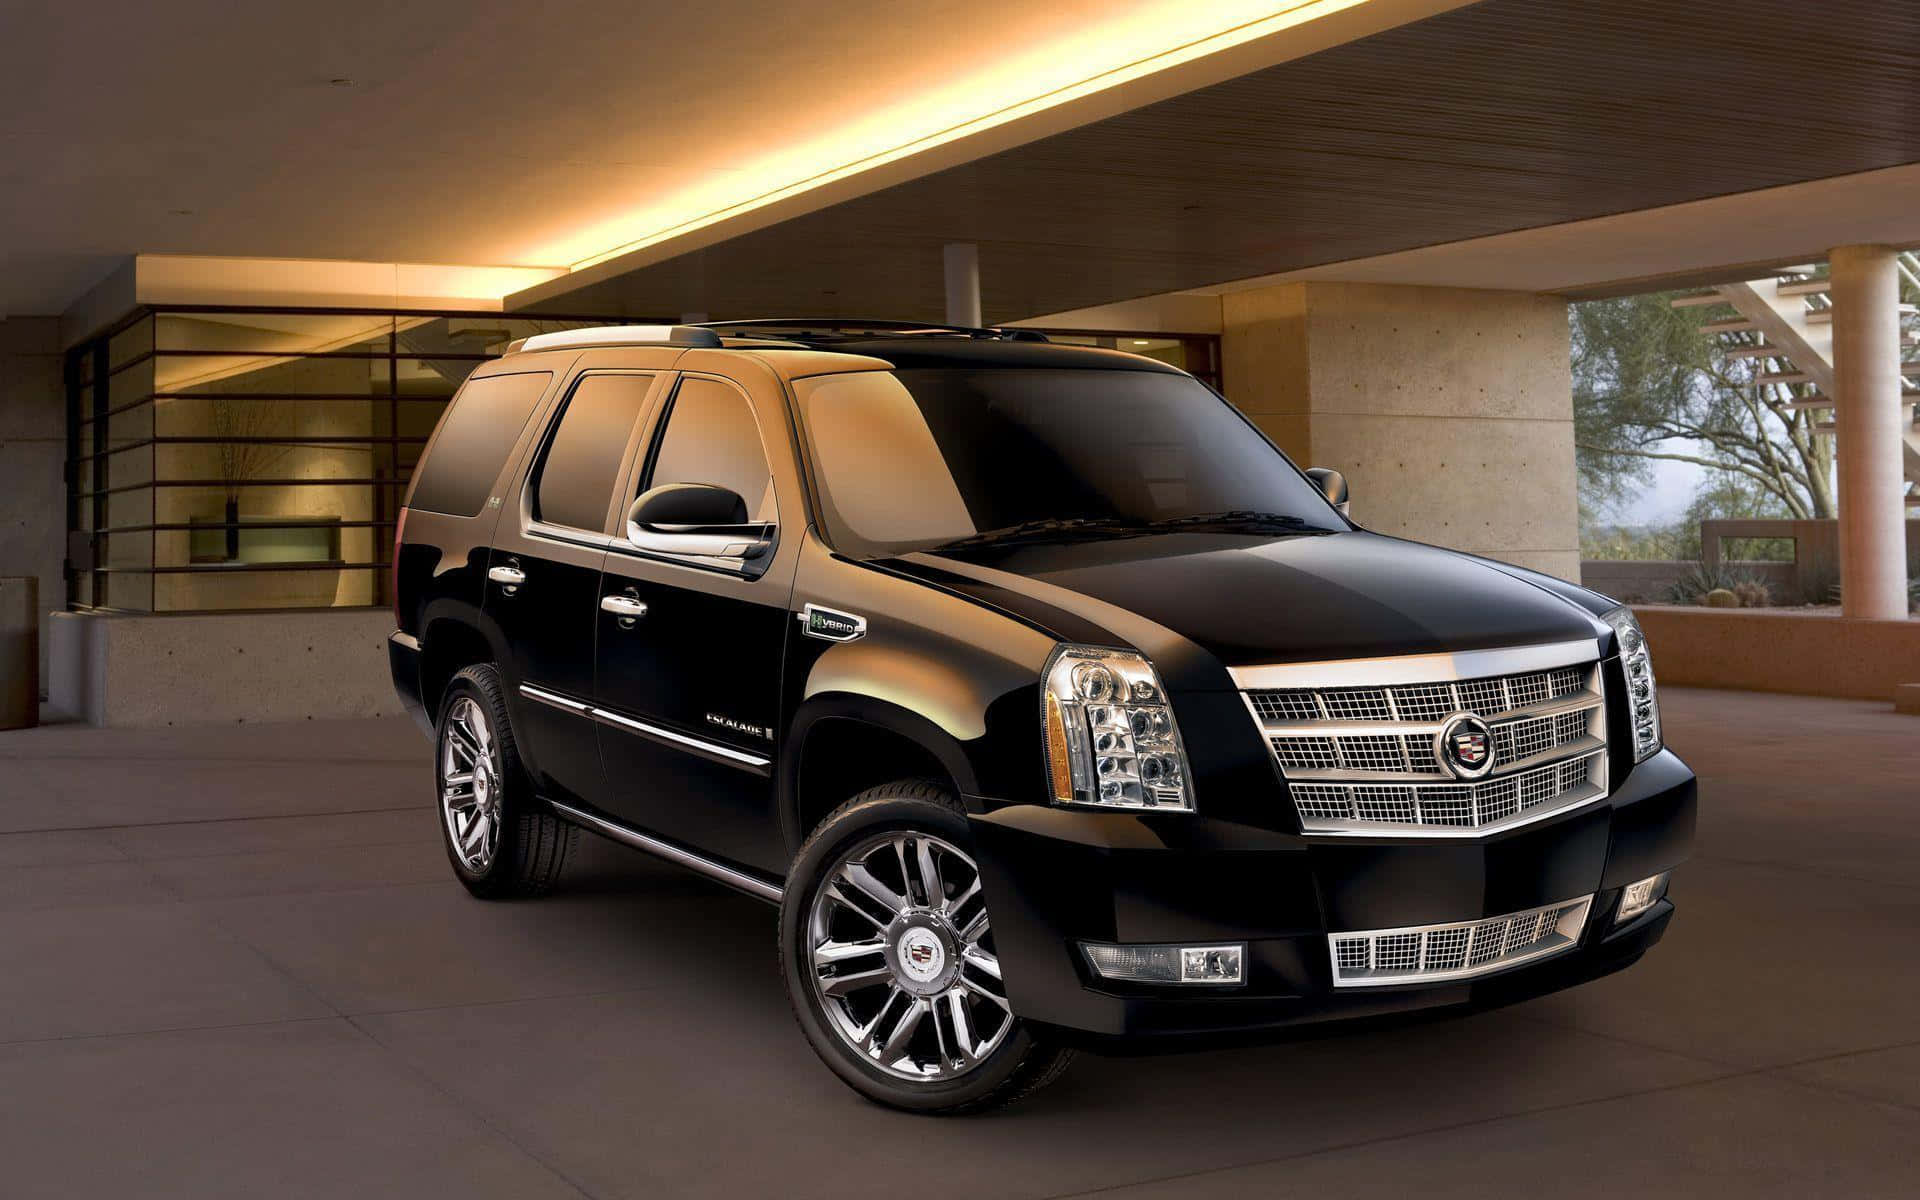 A Luxurious Cadillac Escalade on the Road Wallpaper